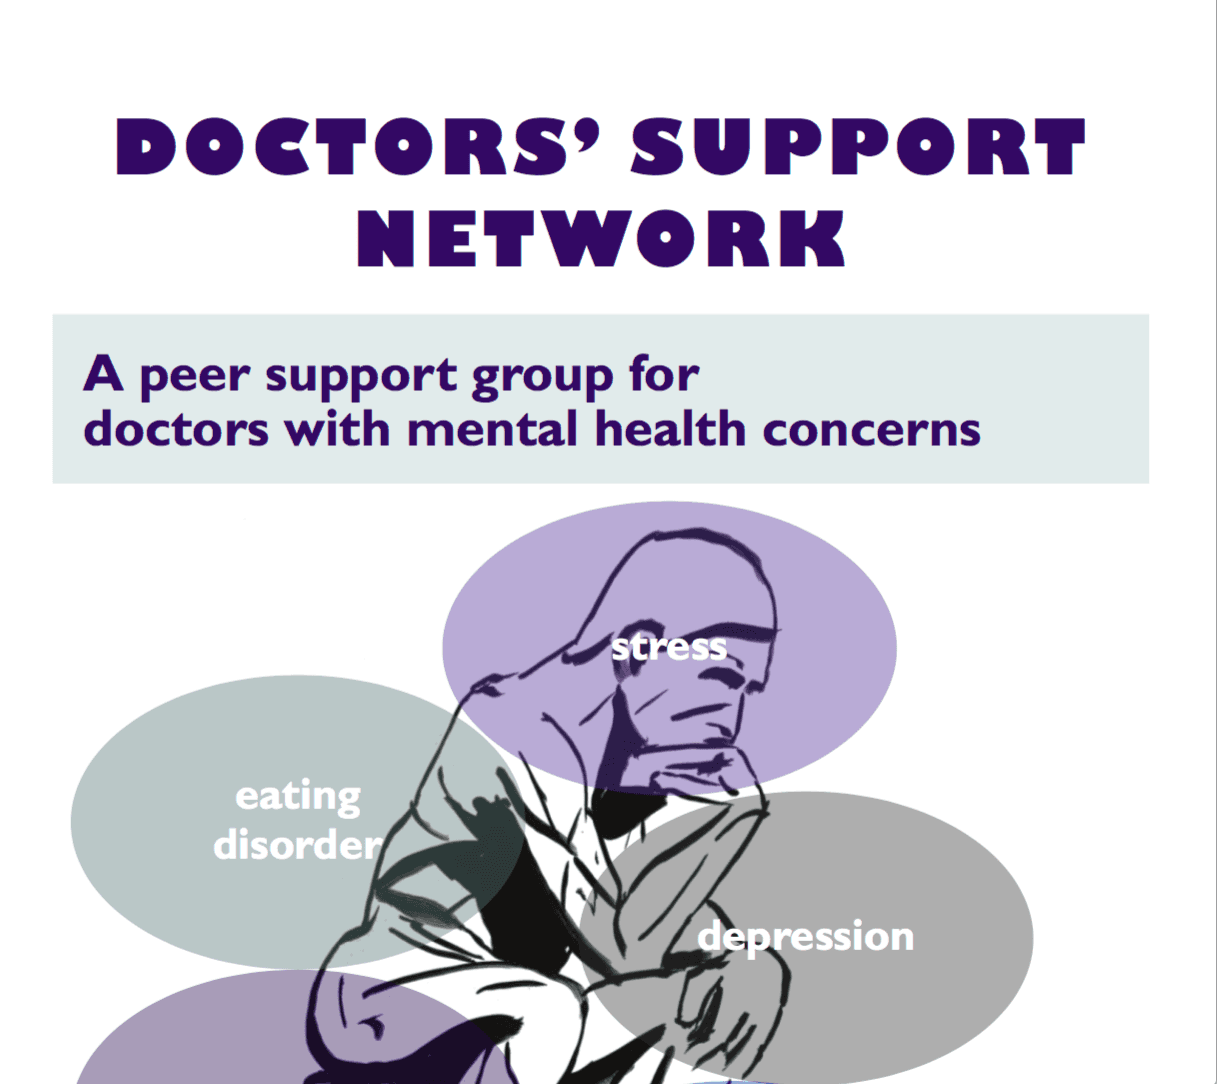 Doctors' Support Network 2016 DSN A4 poster mental health